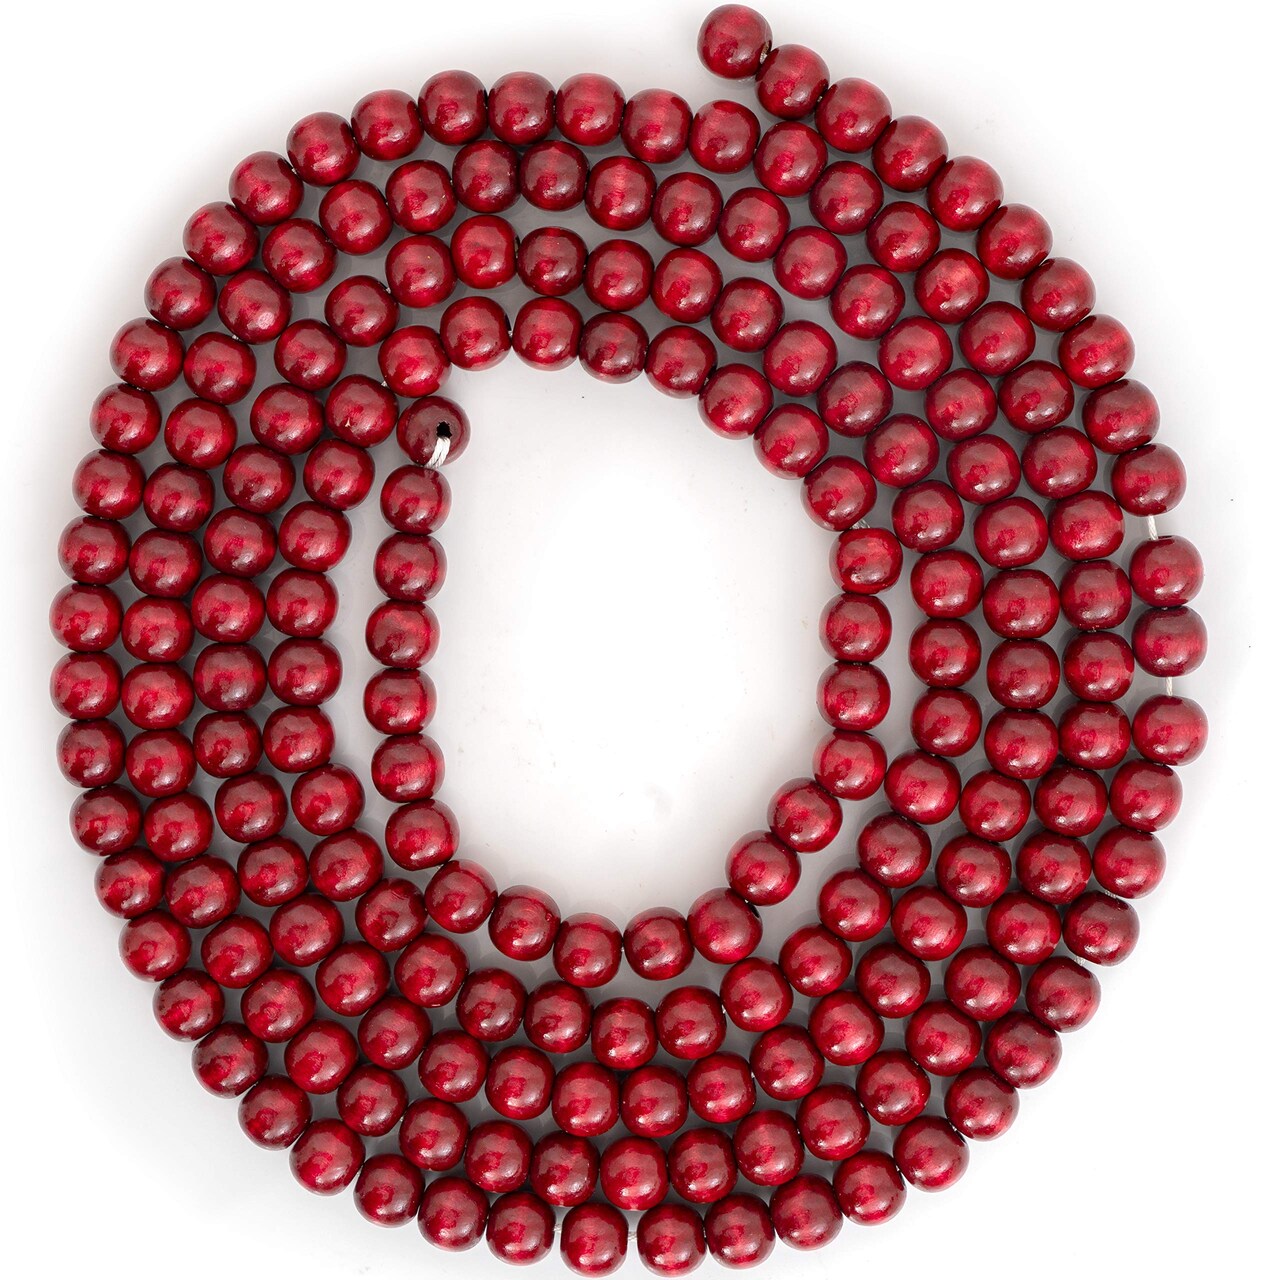 Ornativity Red Cranberry Wooden Garland - Rustic Red Wood Beaded Christmas  Tree Decorations Garland Bead Strand